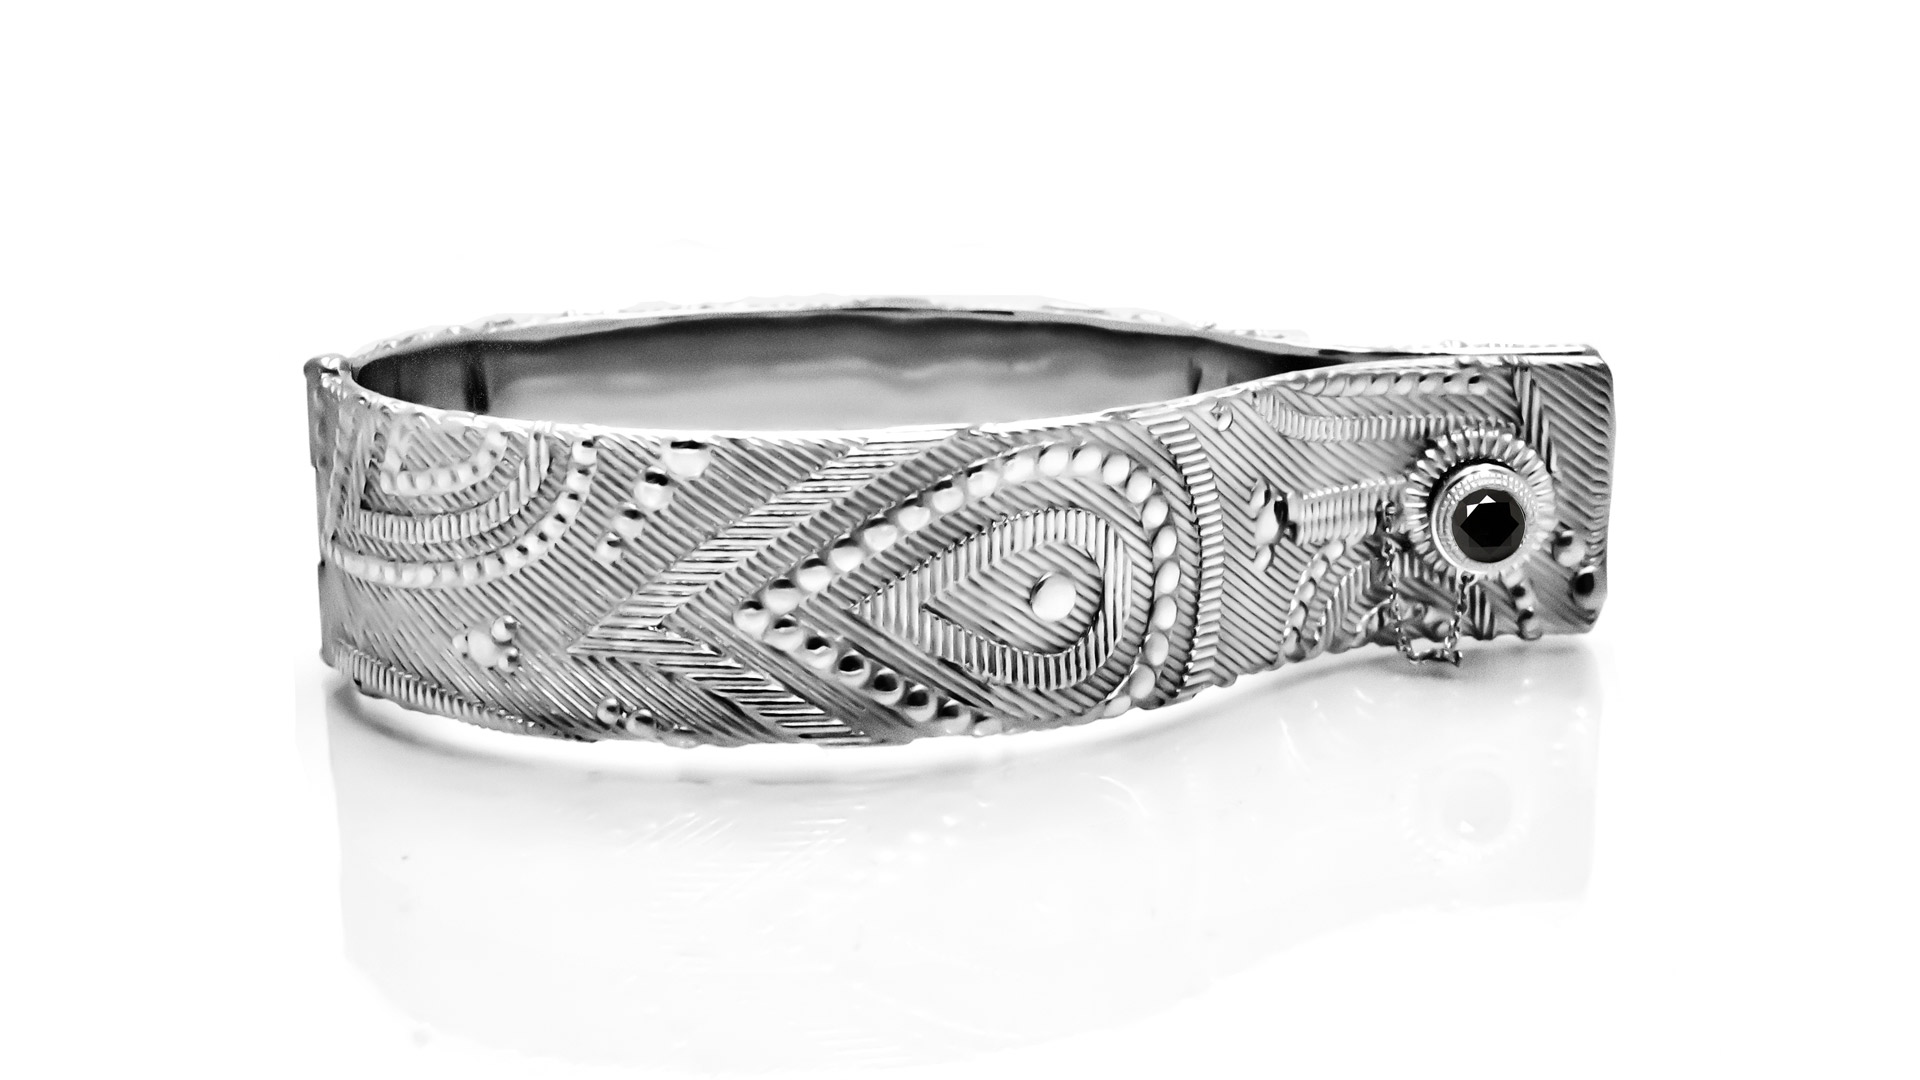 French cuff by Charlie Herner